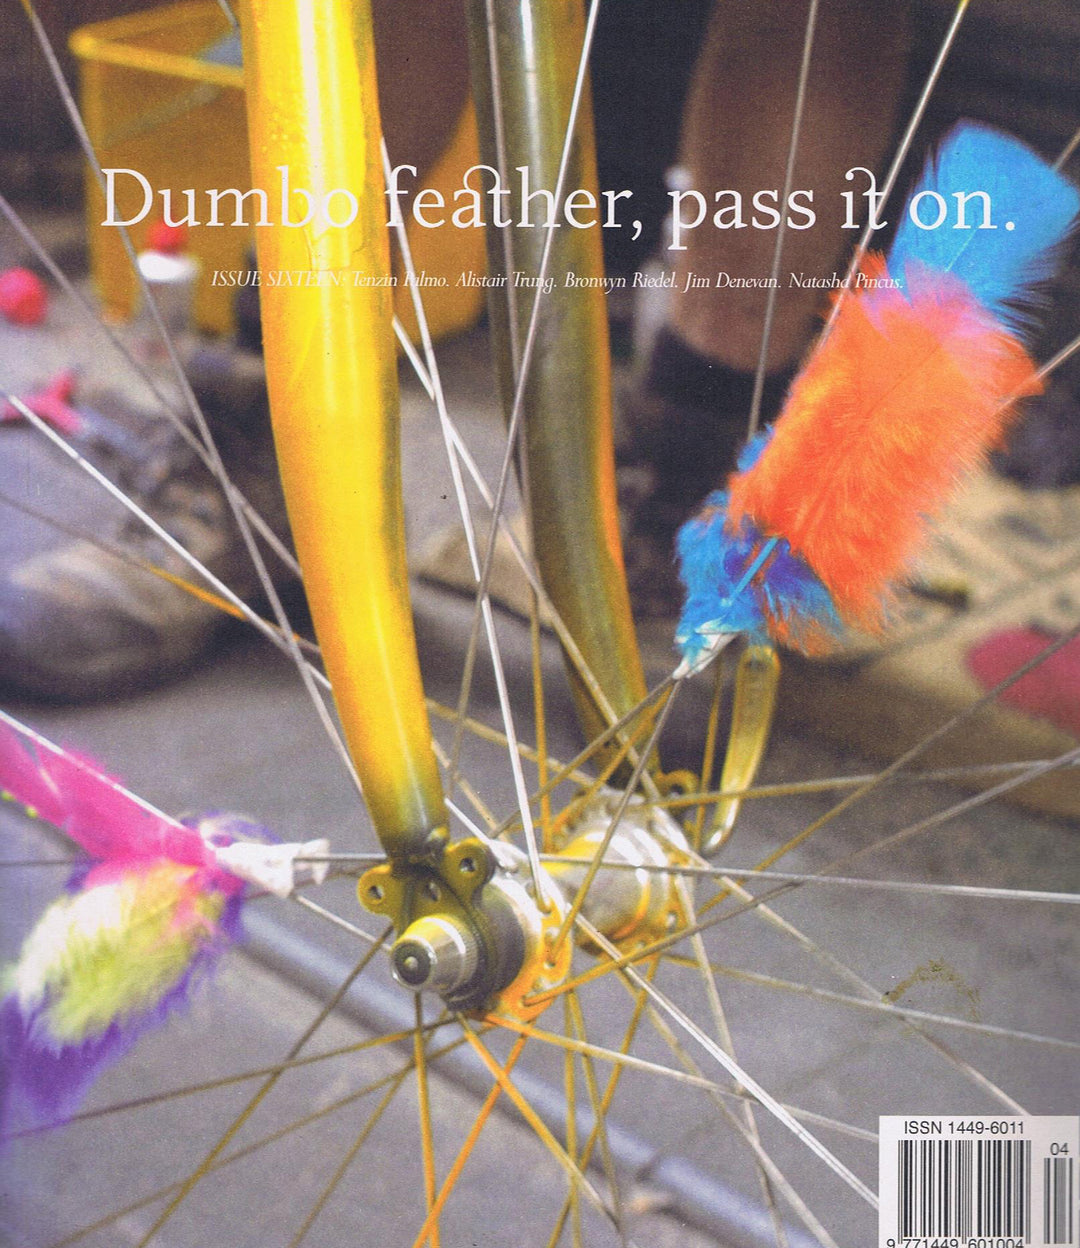 DUMBO FEATHER - Issue 16 WINTER 2008